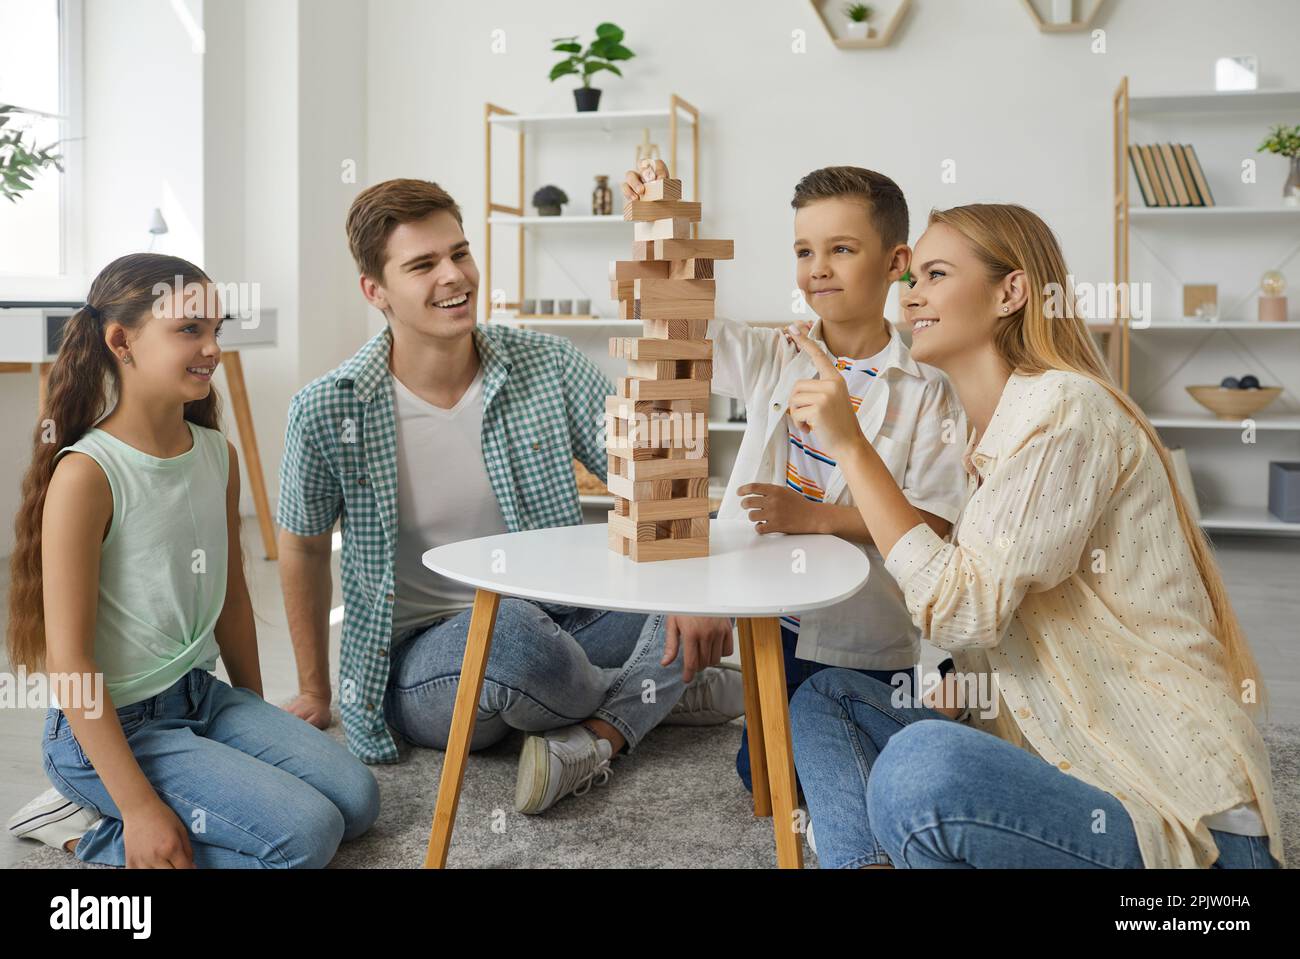 Friendly happy family with two children playing tumbling tower sitting on floor at home living room. Stock Photo